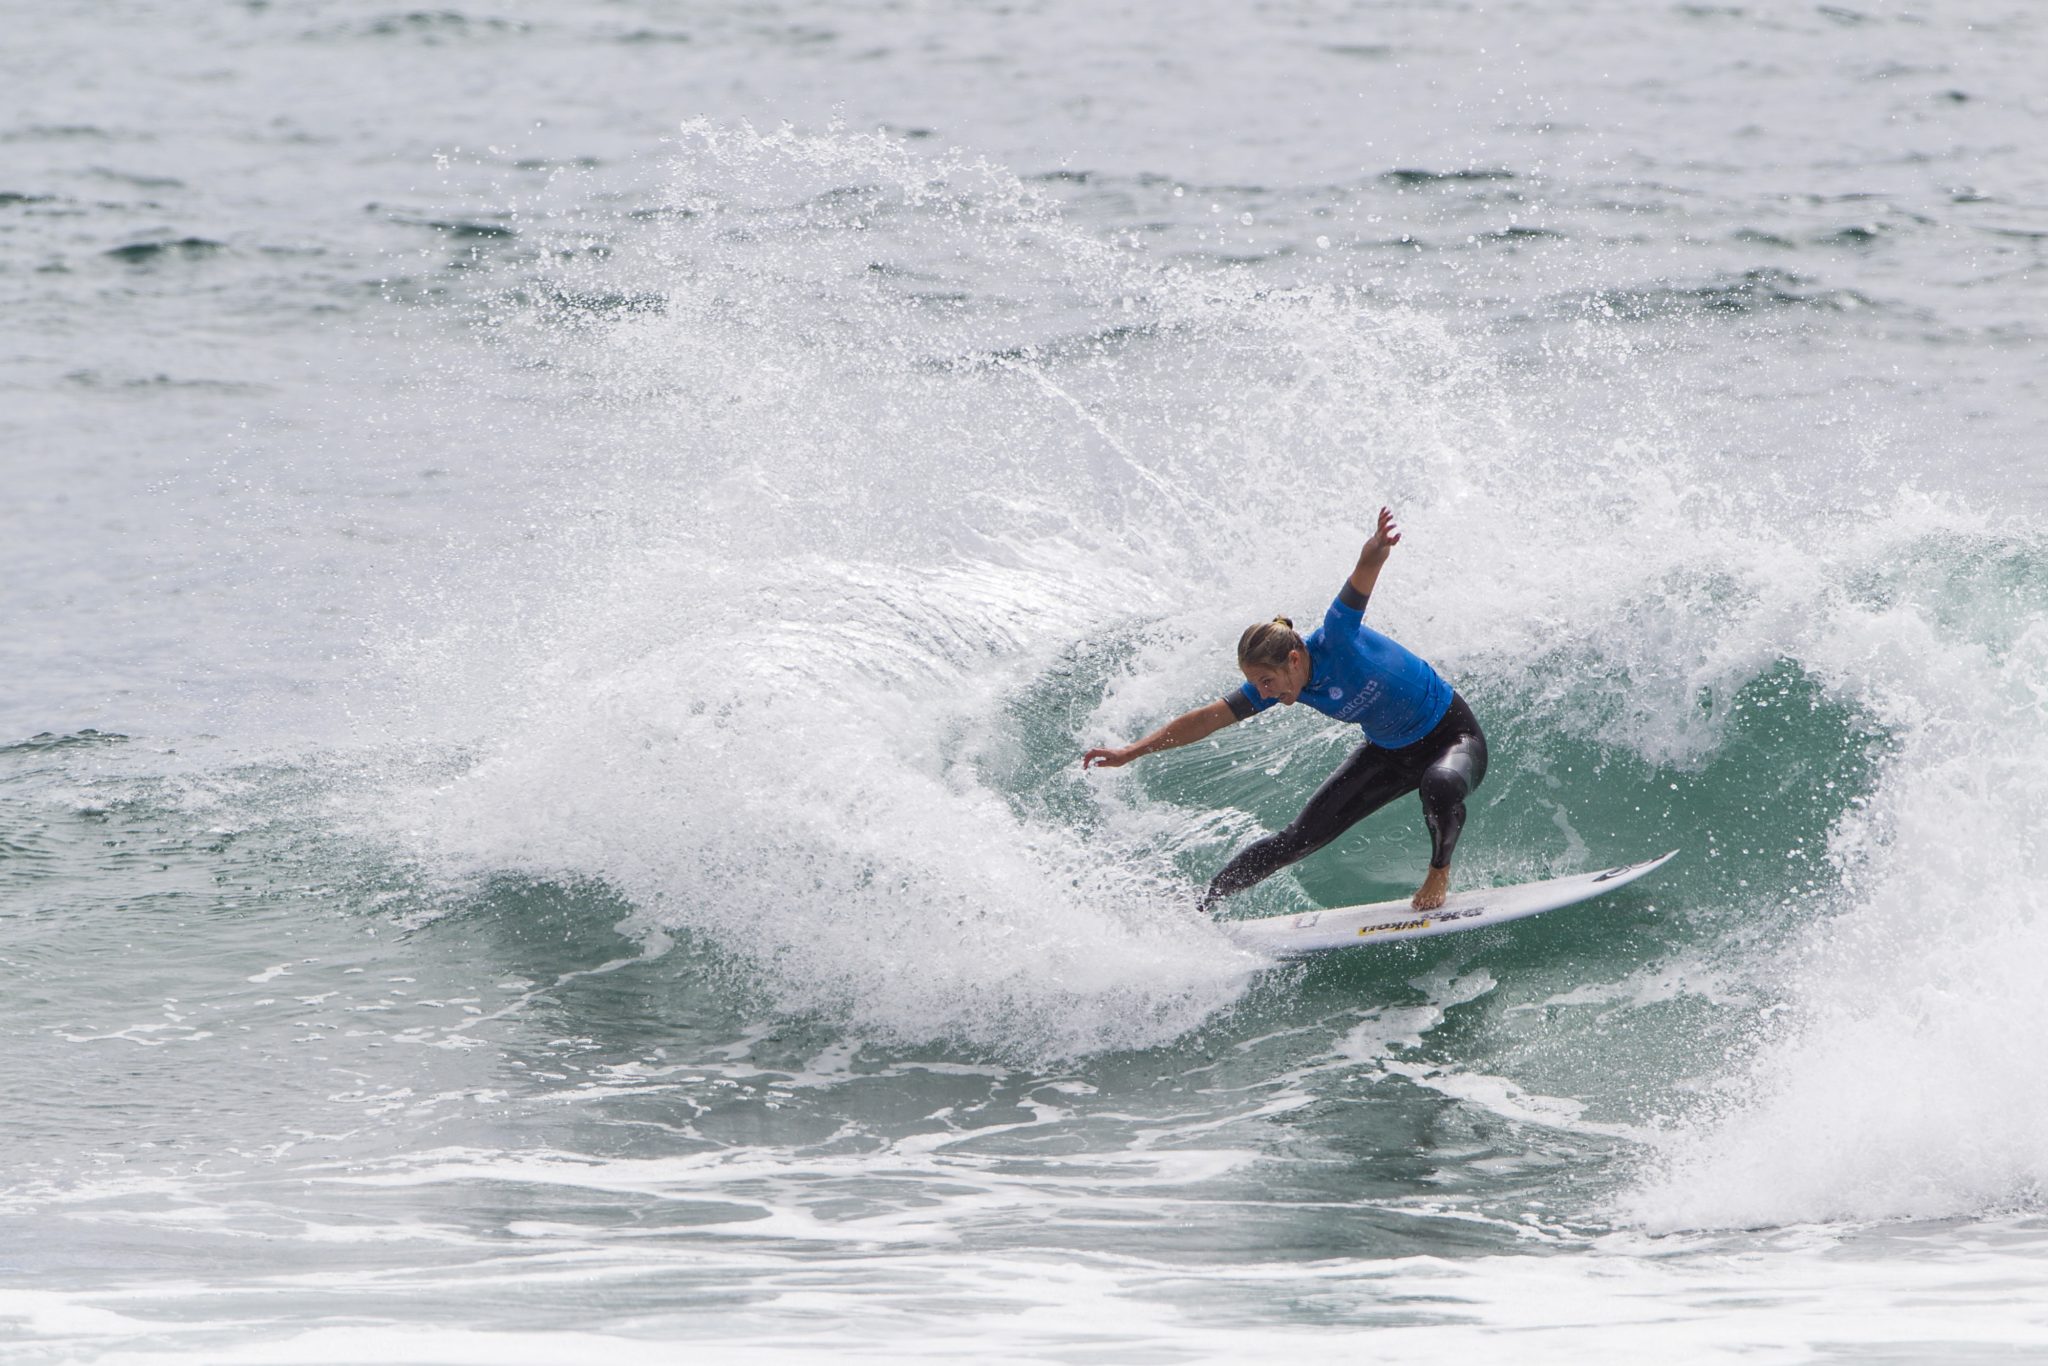 Stephanie Gilmore surfing during Heat 4 of The Quarterfinals at The Swatch Pro Trestles